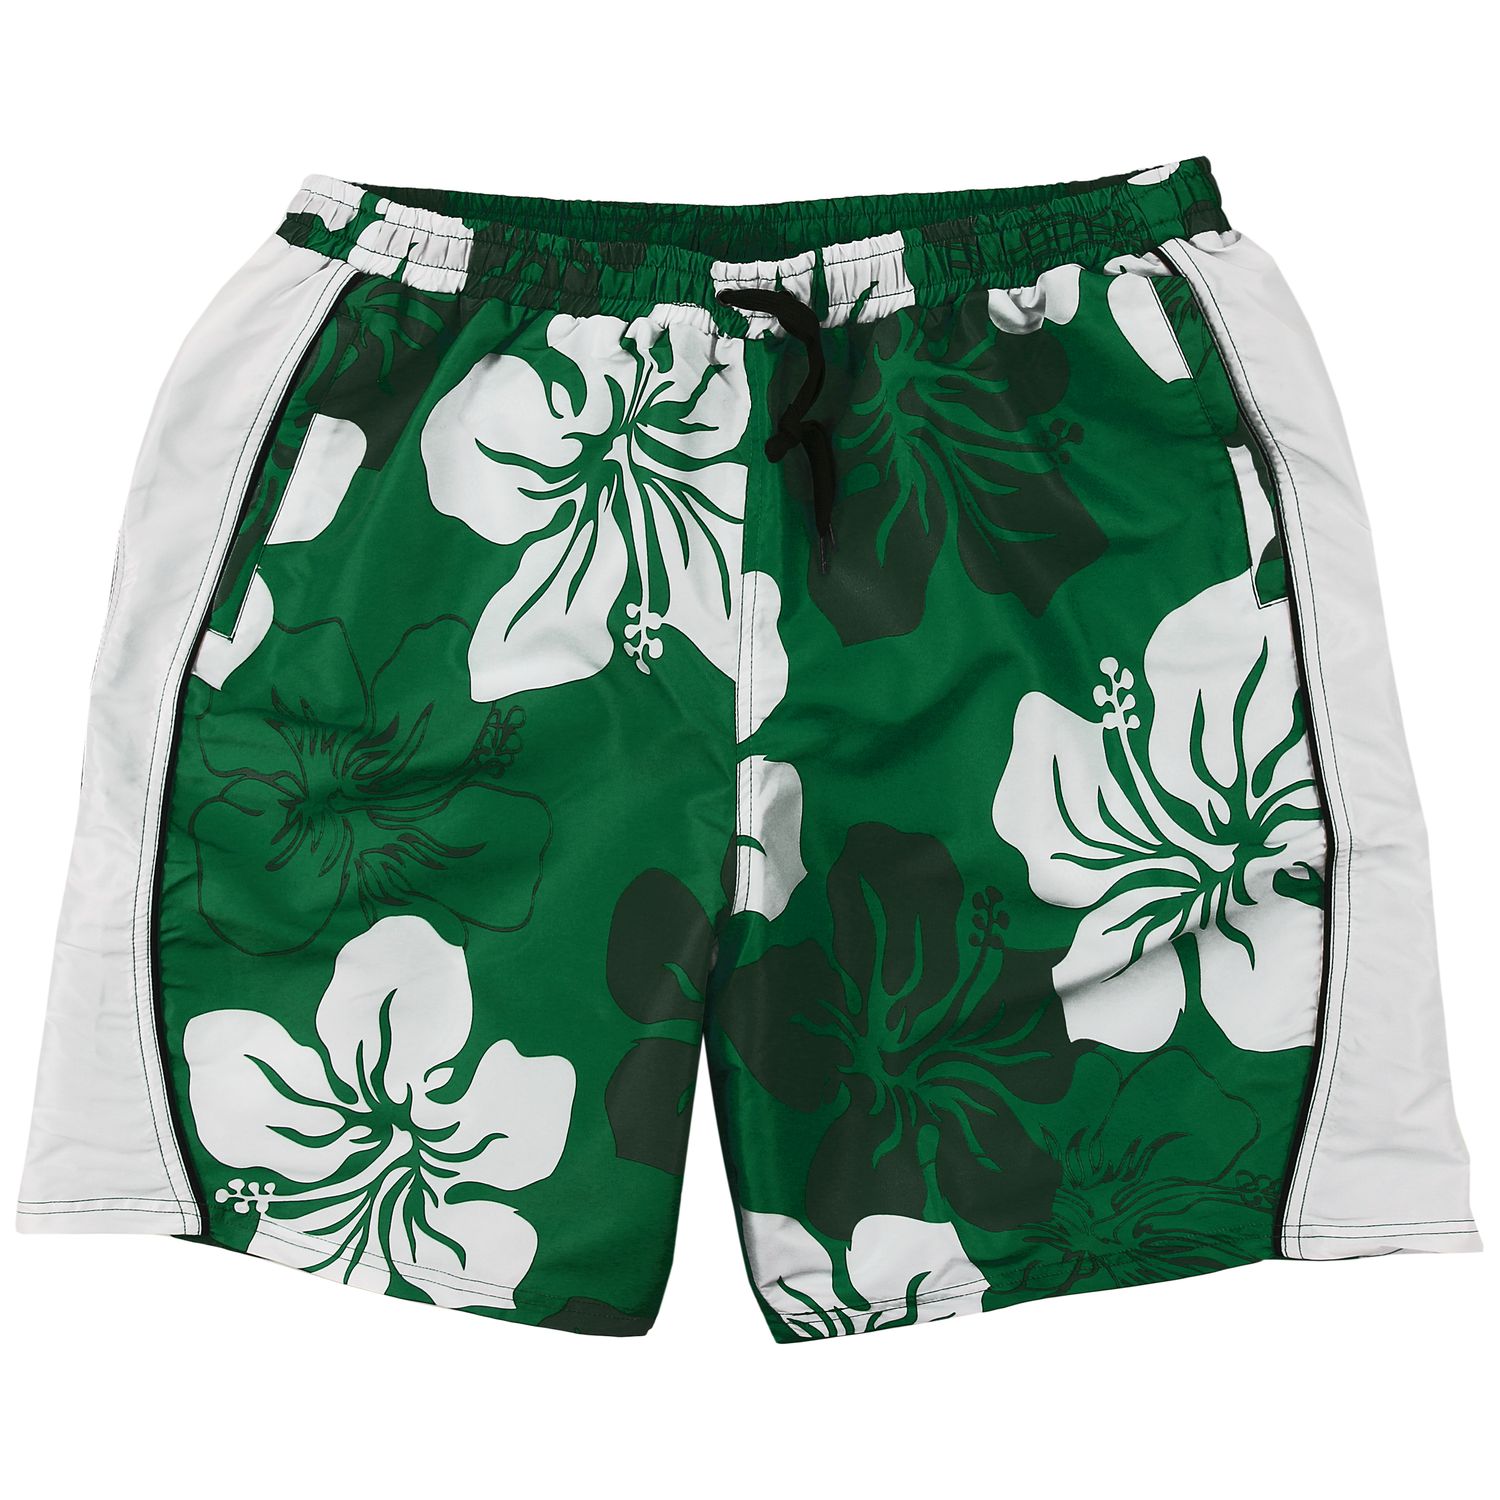 Swim shorts for men green patterned by Abraxas up to oversize 10XL